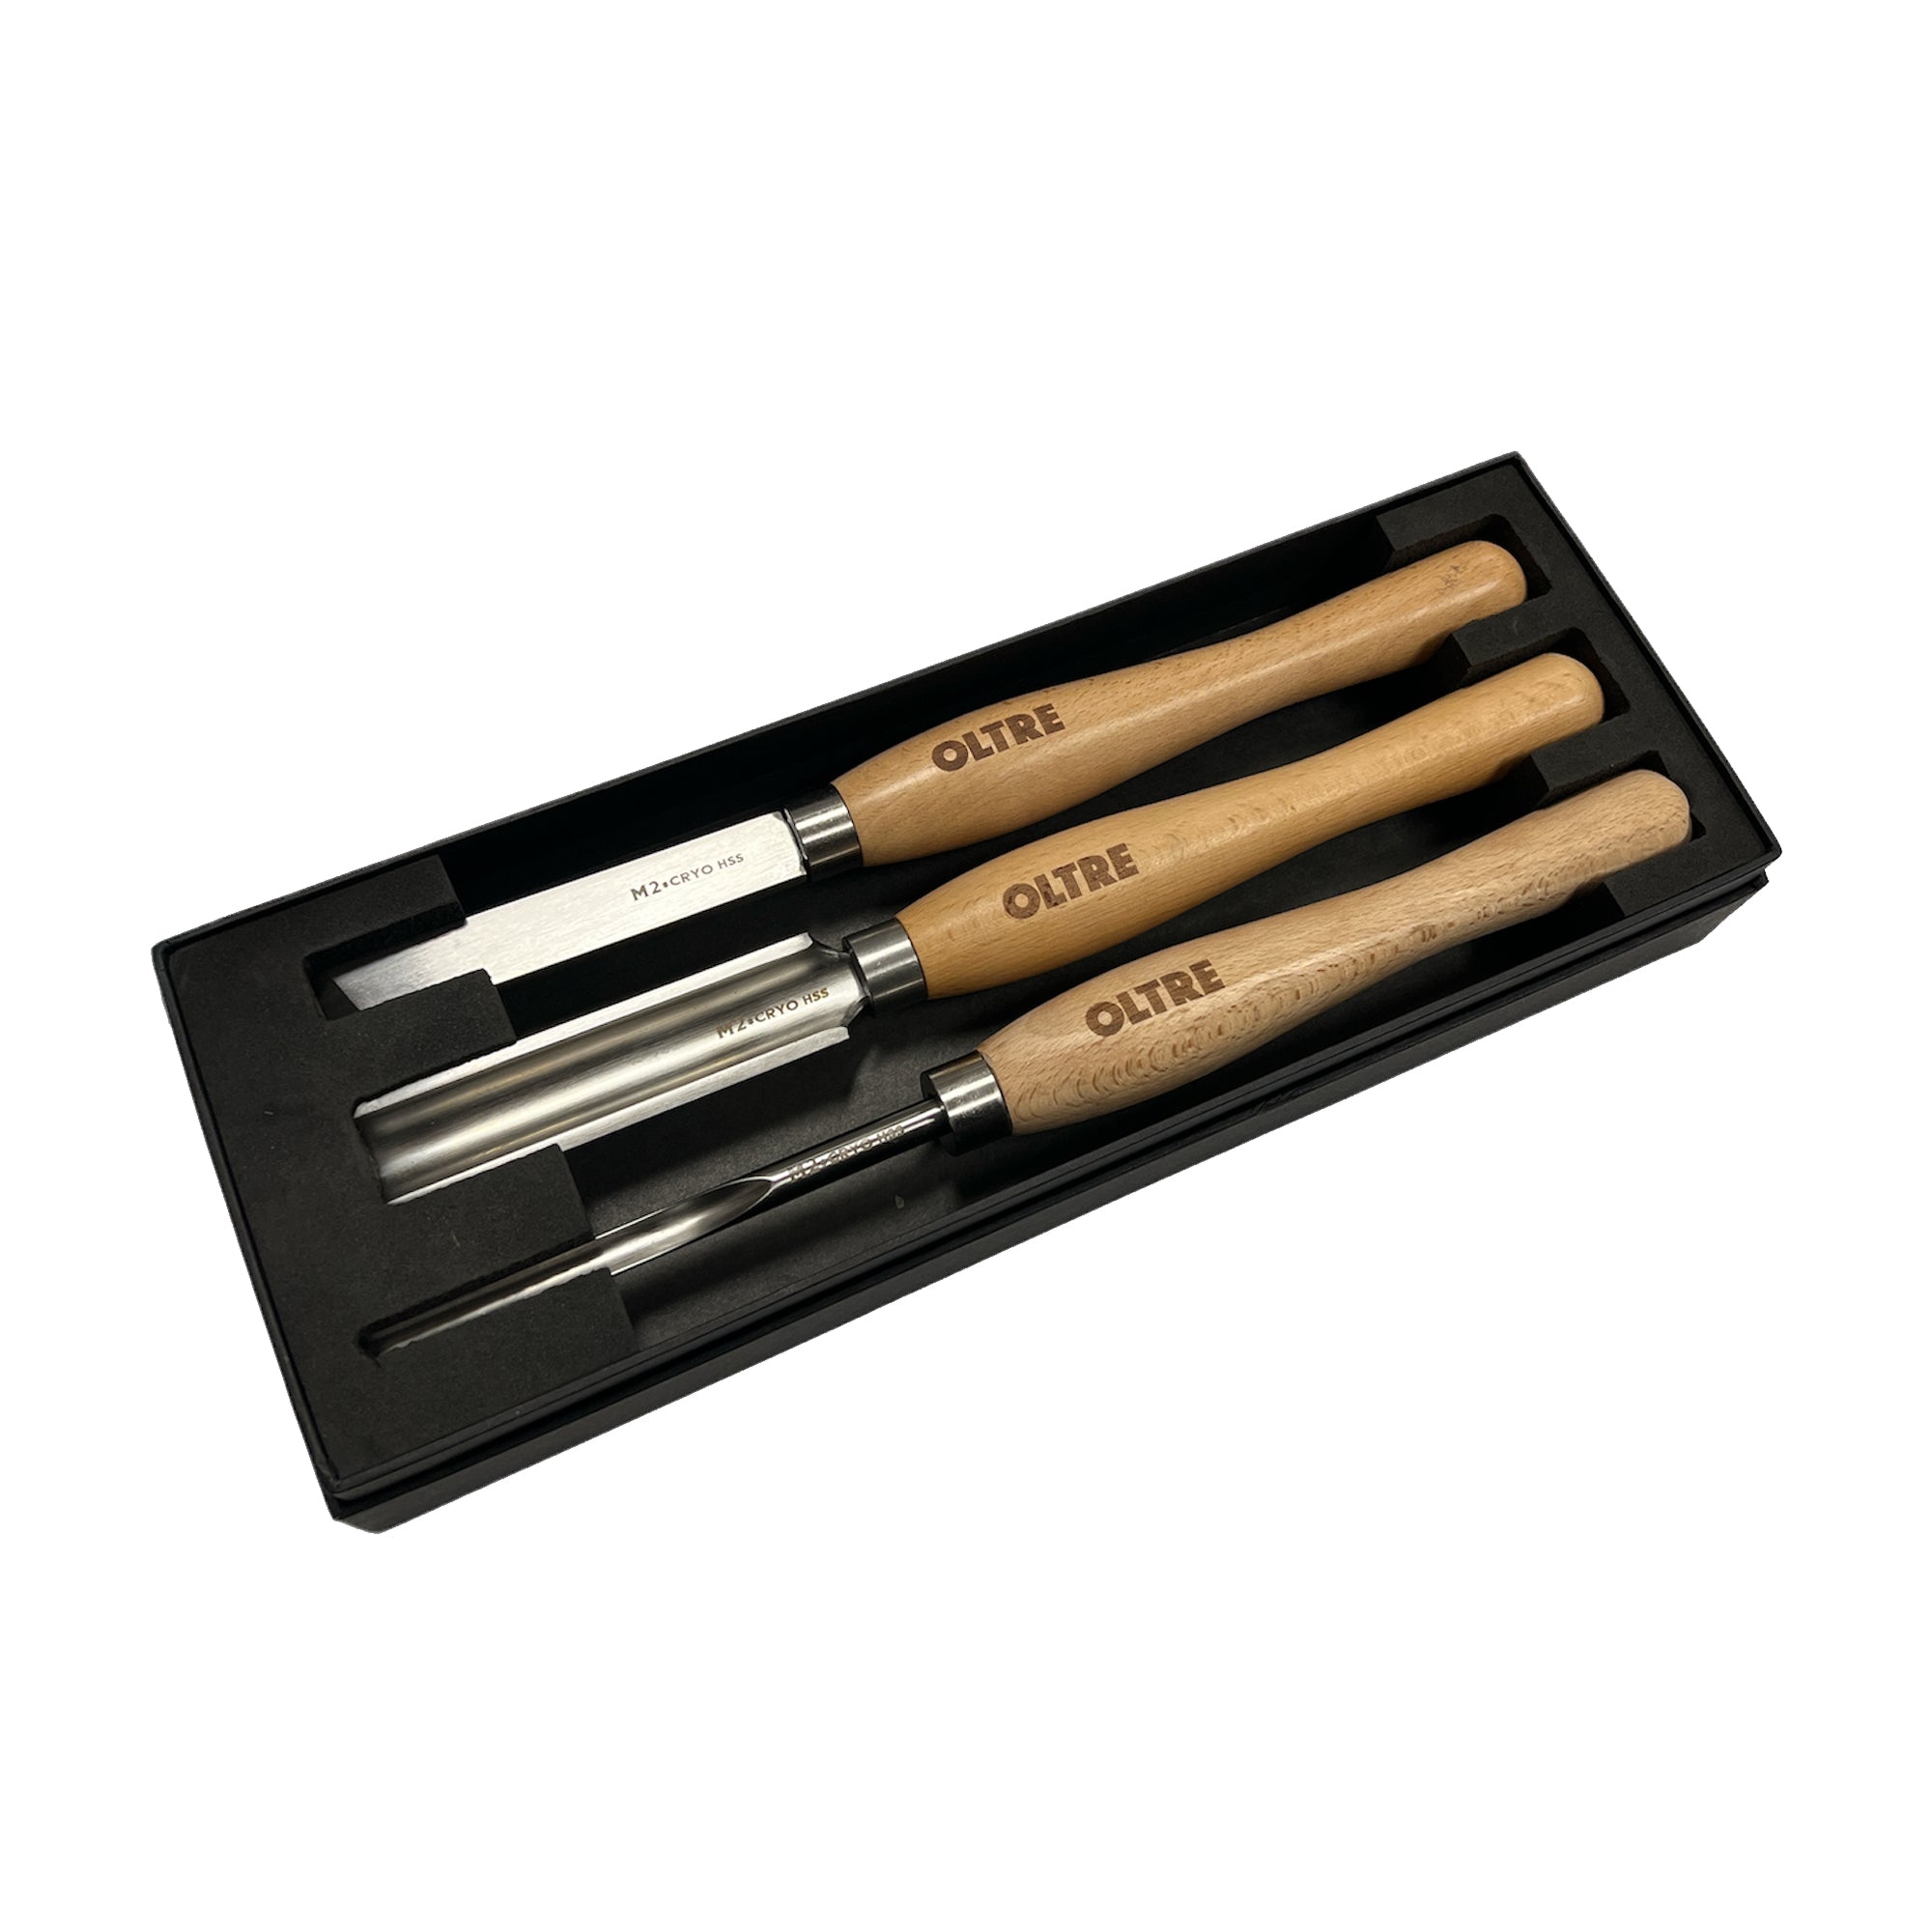 3Pce Woodturning Chisel Tool M2 CRYO HSS (Small Turning Tools) Set by Oltre